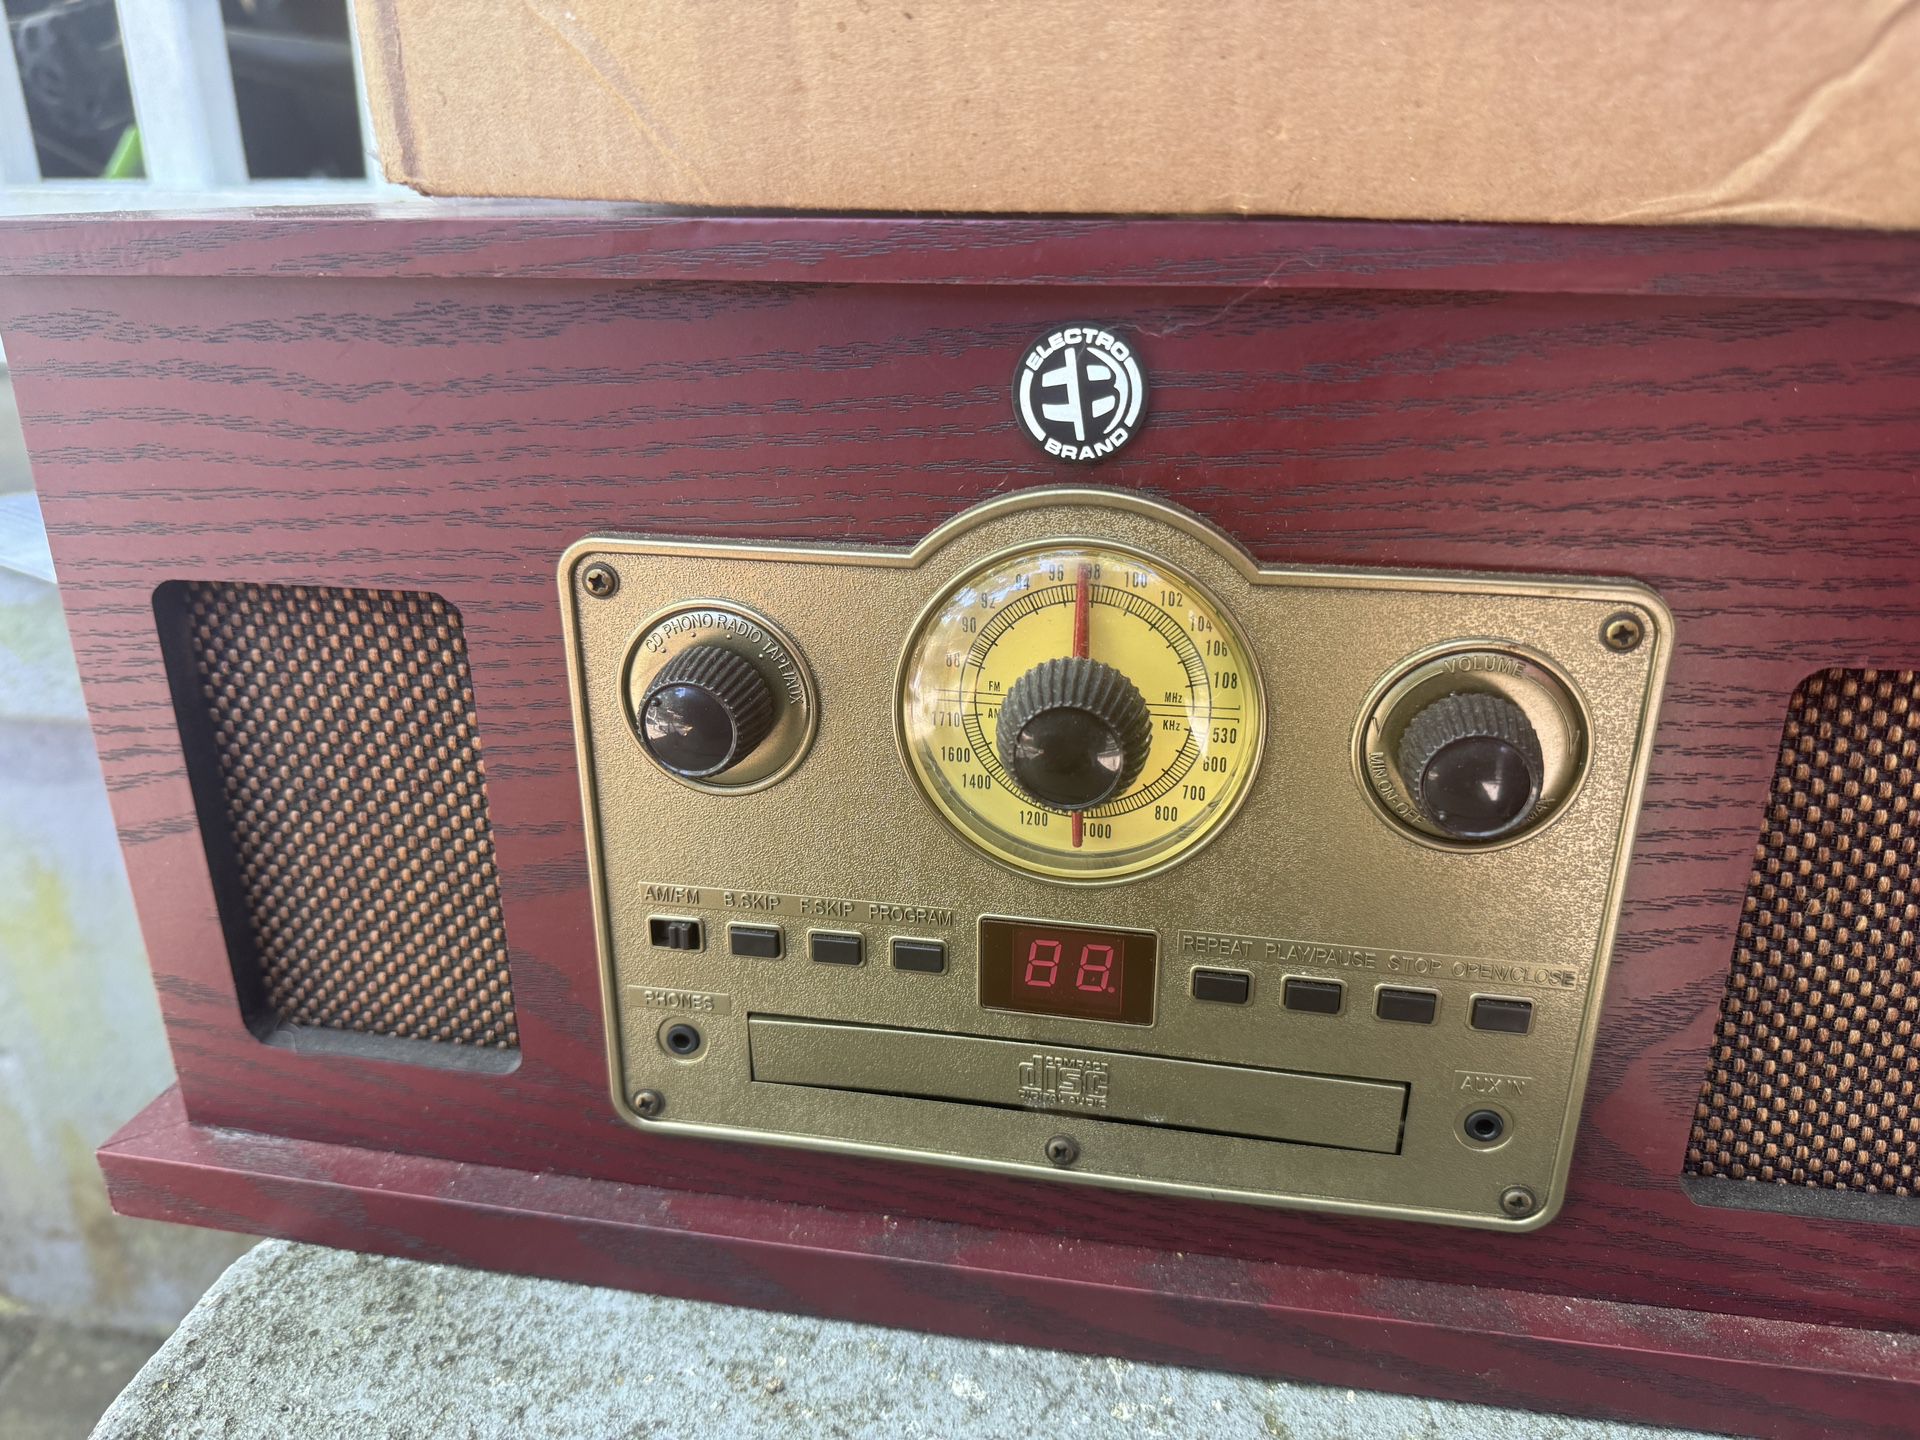 Electro Brand 5 in 1 vintage audio player plays am/fm radio, cd, turntable record player, casette, and aux.